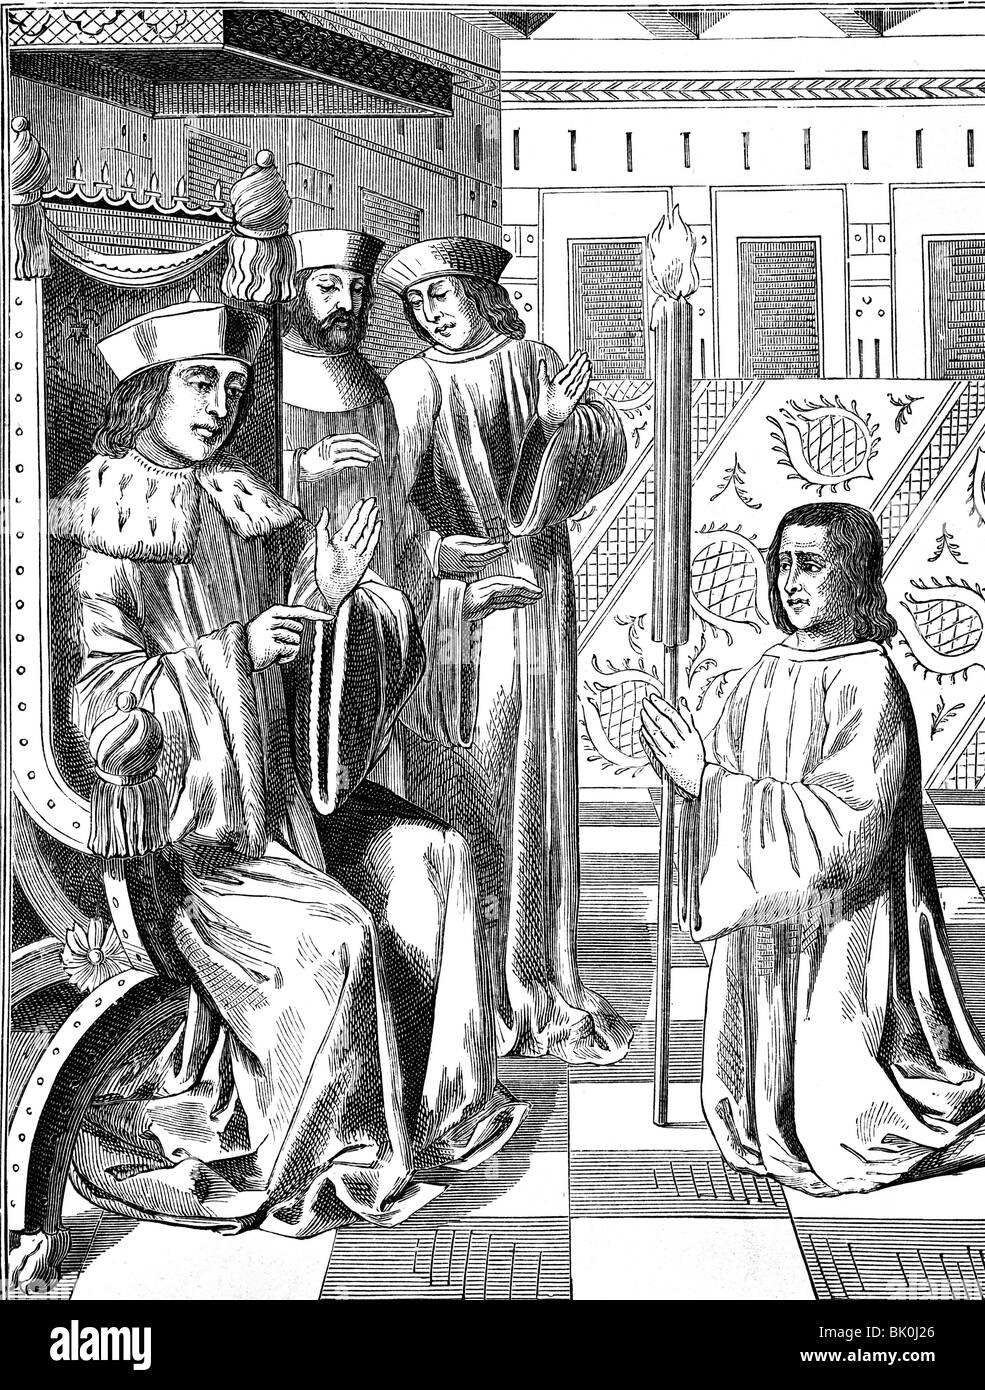 Coeur, Jacques, 1395 - 25.11.1456, French merchant, as penitent before the parliament of Poitiers, 1451, miniature from the Chronicles of Enguerrand de Monstrelet, circa 1455, wood engraving, 19th century, , Stock Photo